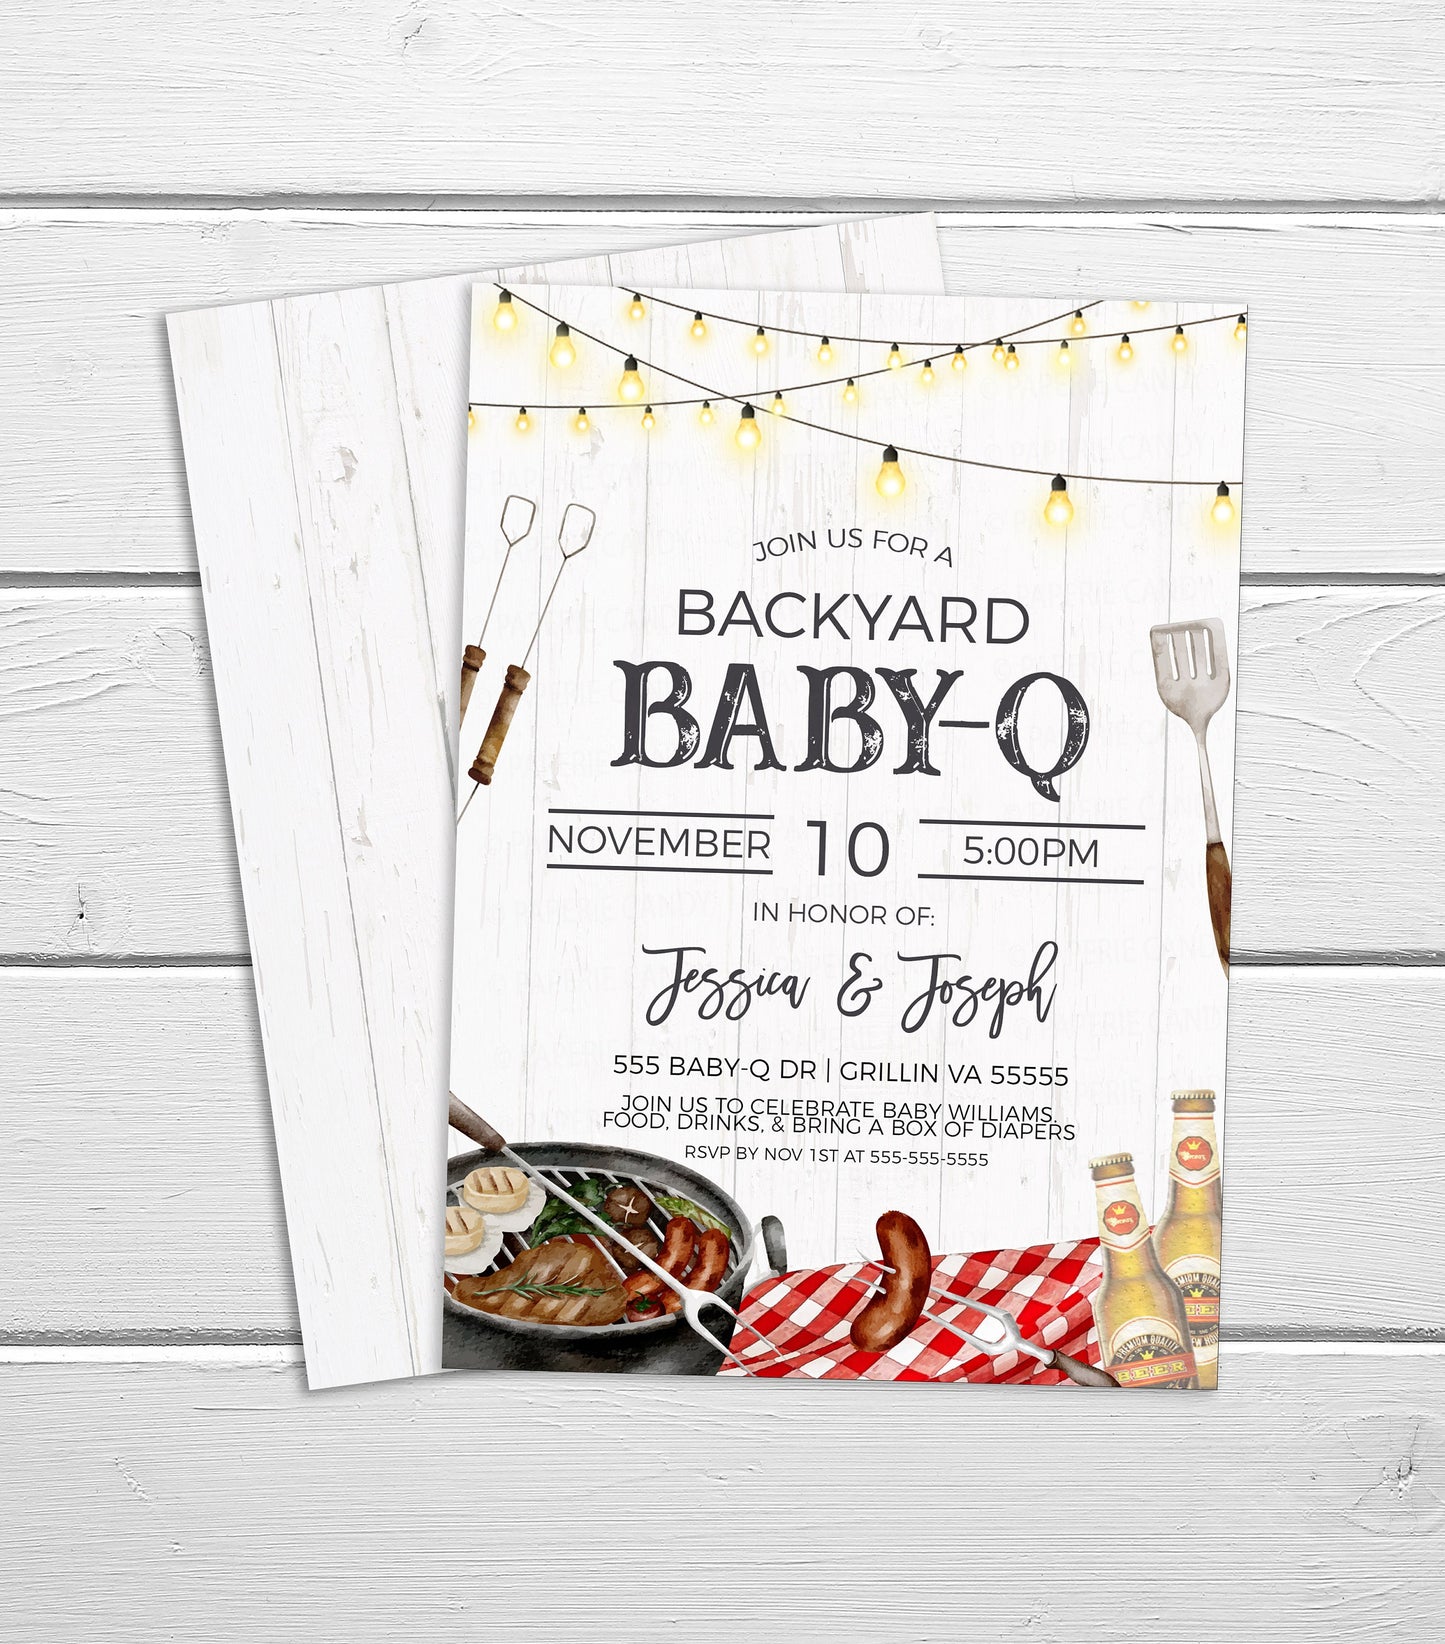 Backyard Baby-Q Couples Shower Invitation, BBQ Burgers Beer Diapers Invite, Backyard Barbecue, Co-Ed Baby Shower Editable Printable Template